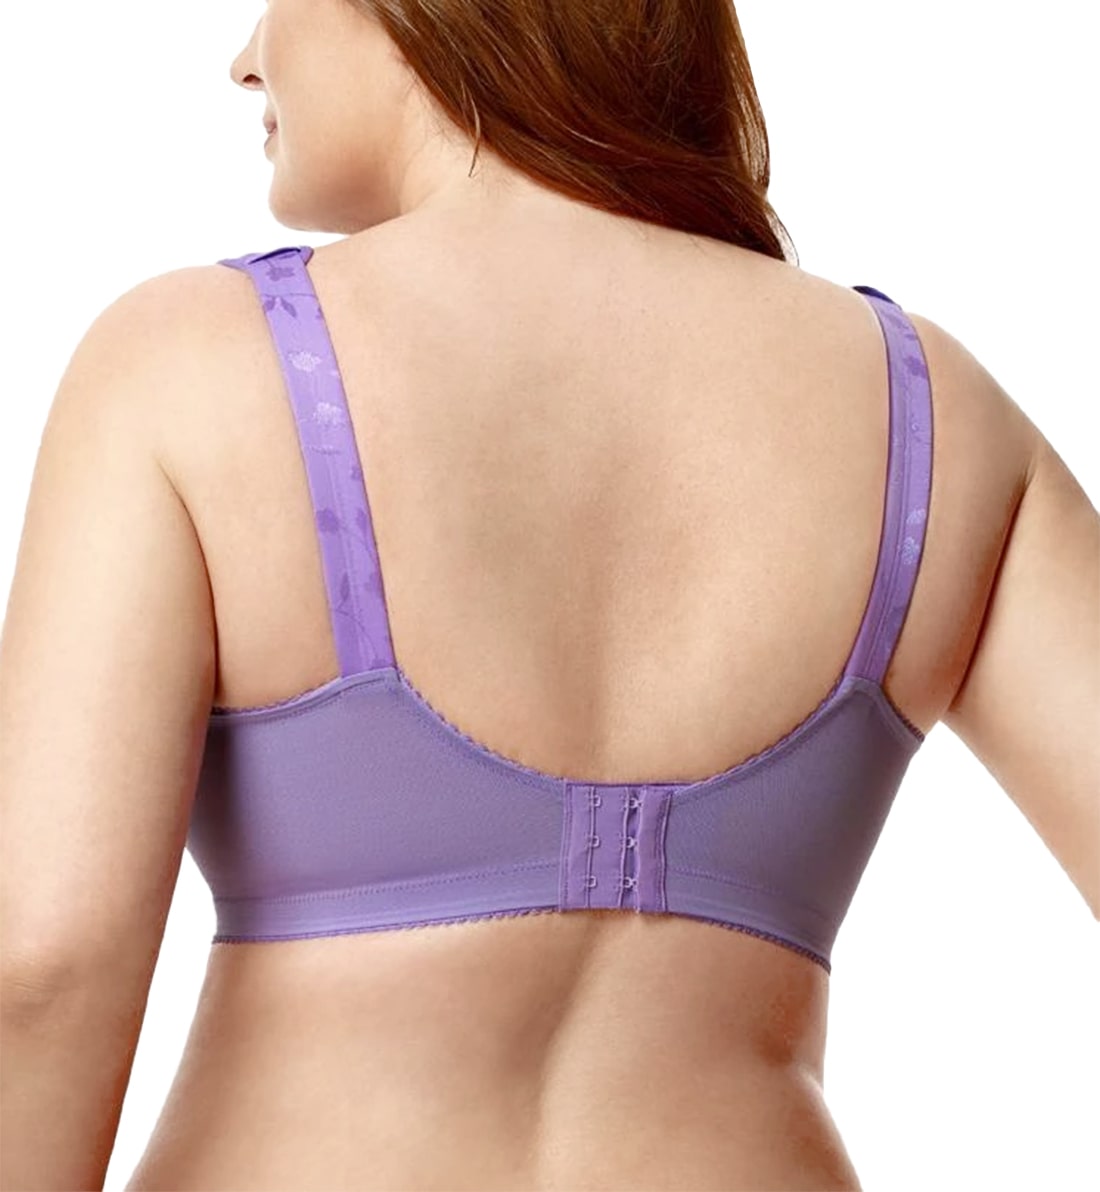 Elila Sidney Jacquard Full Support Softcup (1305),34F,Lilac - Lilac,34F